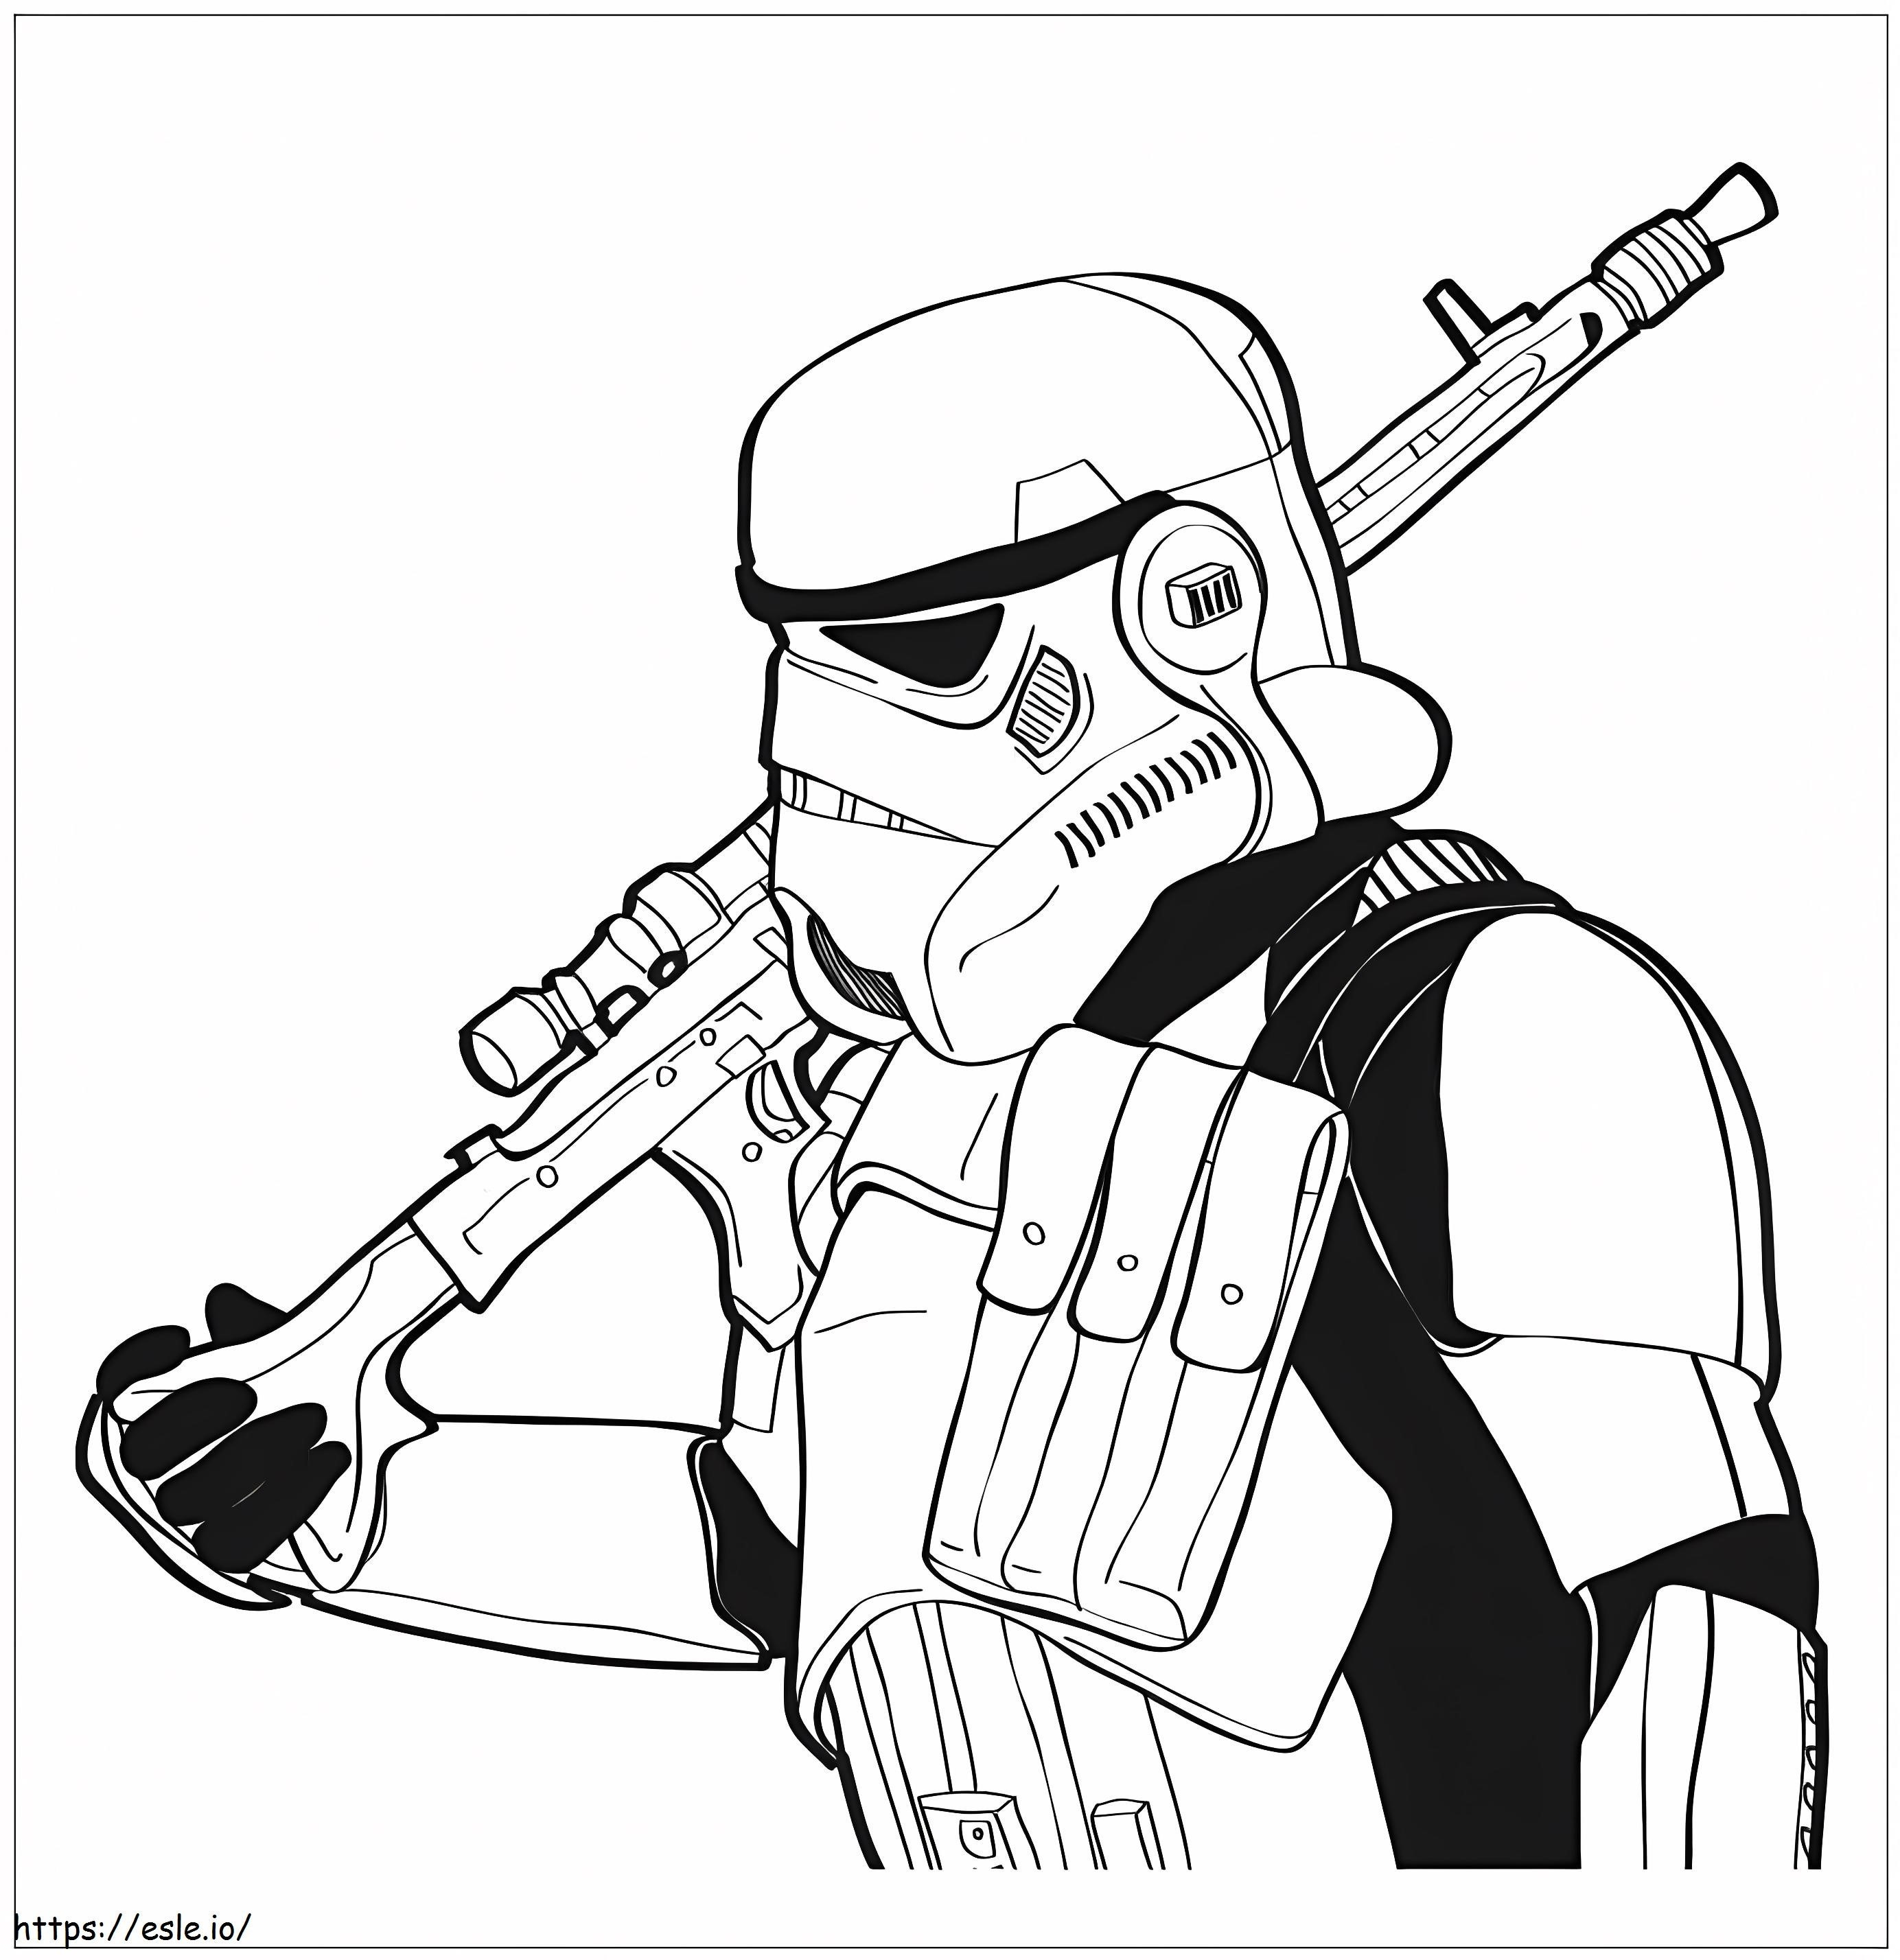 Stormtrooper 9 coloring page